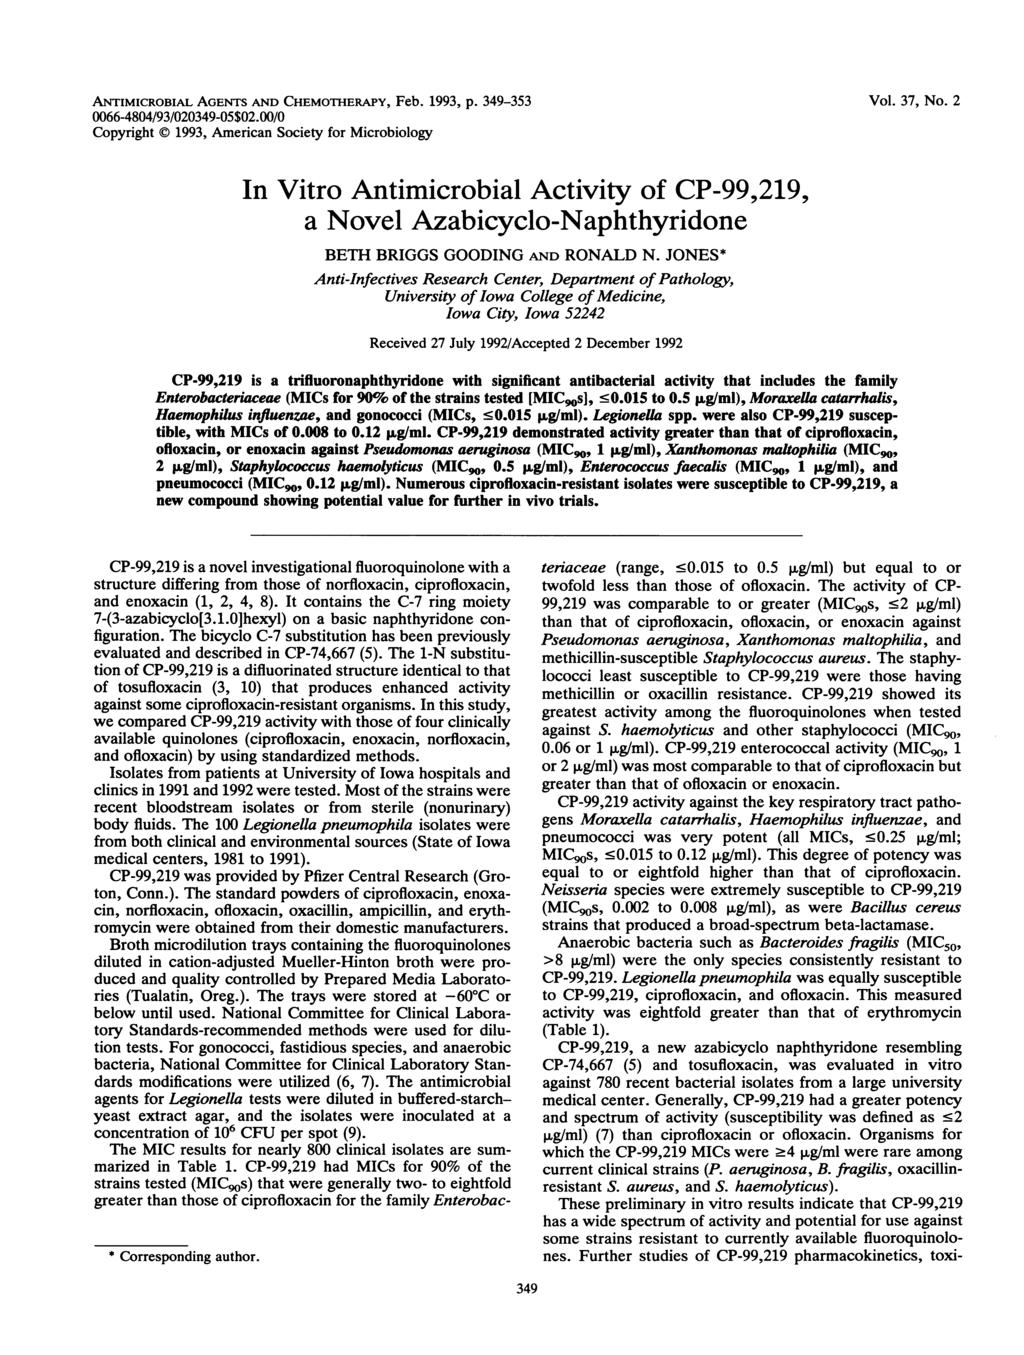 ANTIMICROBIAL AGENTS AND CHEMOTHERAPY, Feb. 993, p. 39-353 0066-0/93/0039-05$0.00/0 Copyright 993, American Society for Microbiology Vol. 37, No.